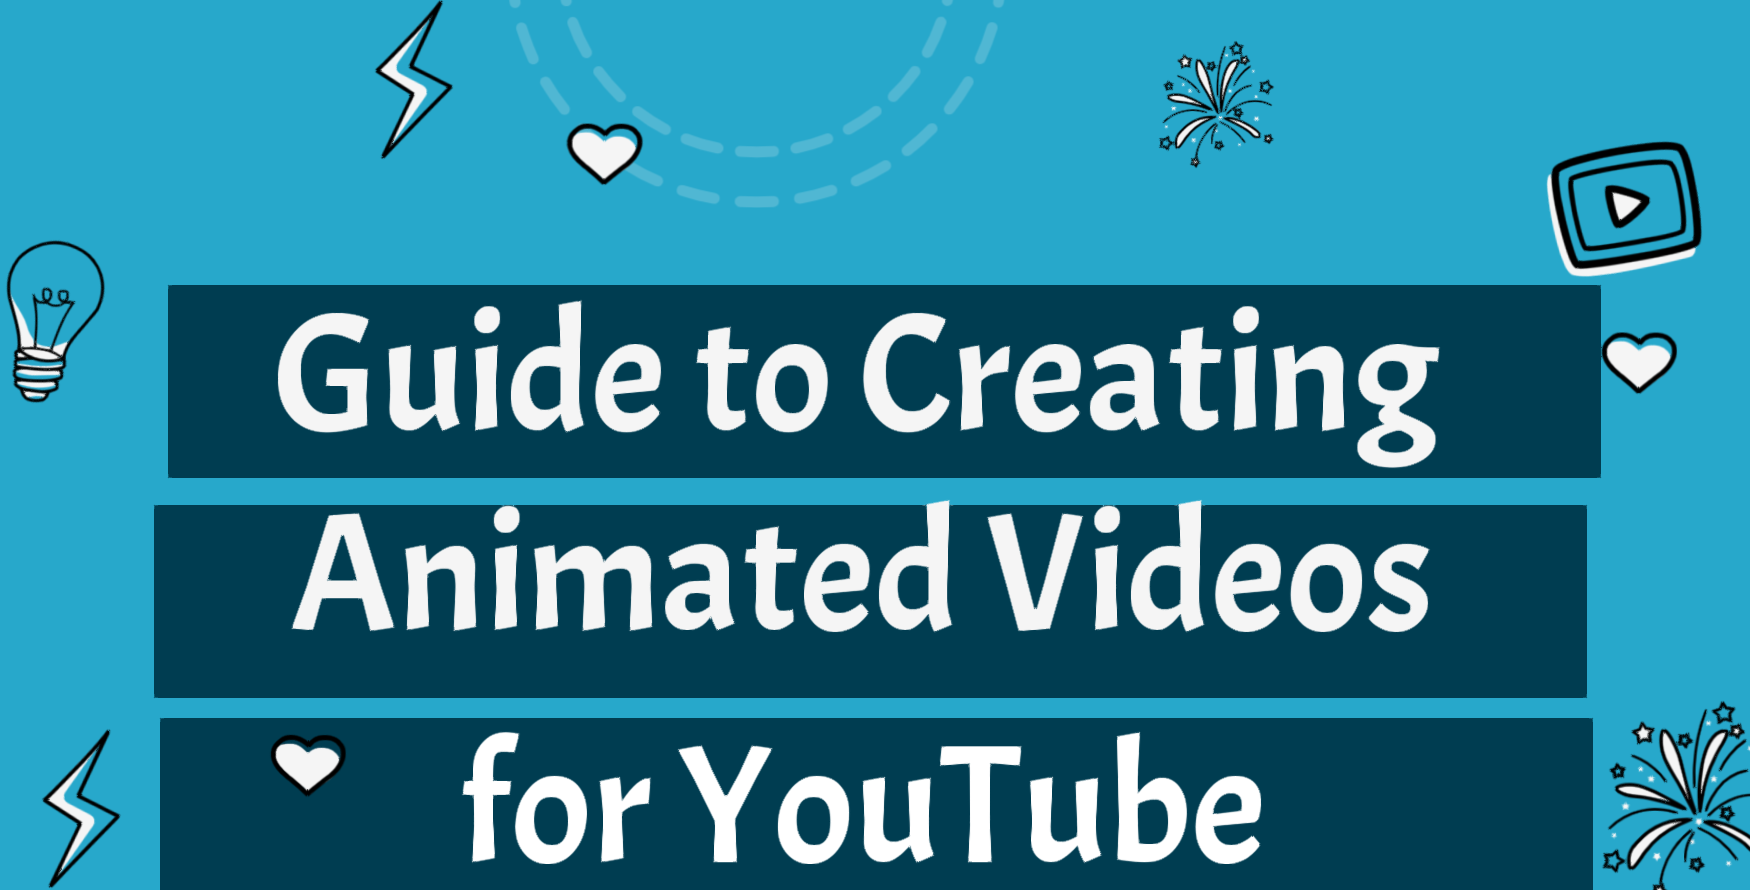 A step-by-step guide on how to create animated videos for YouTube